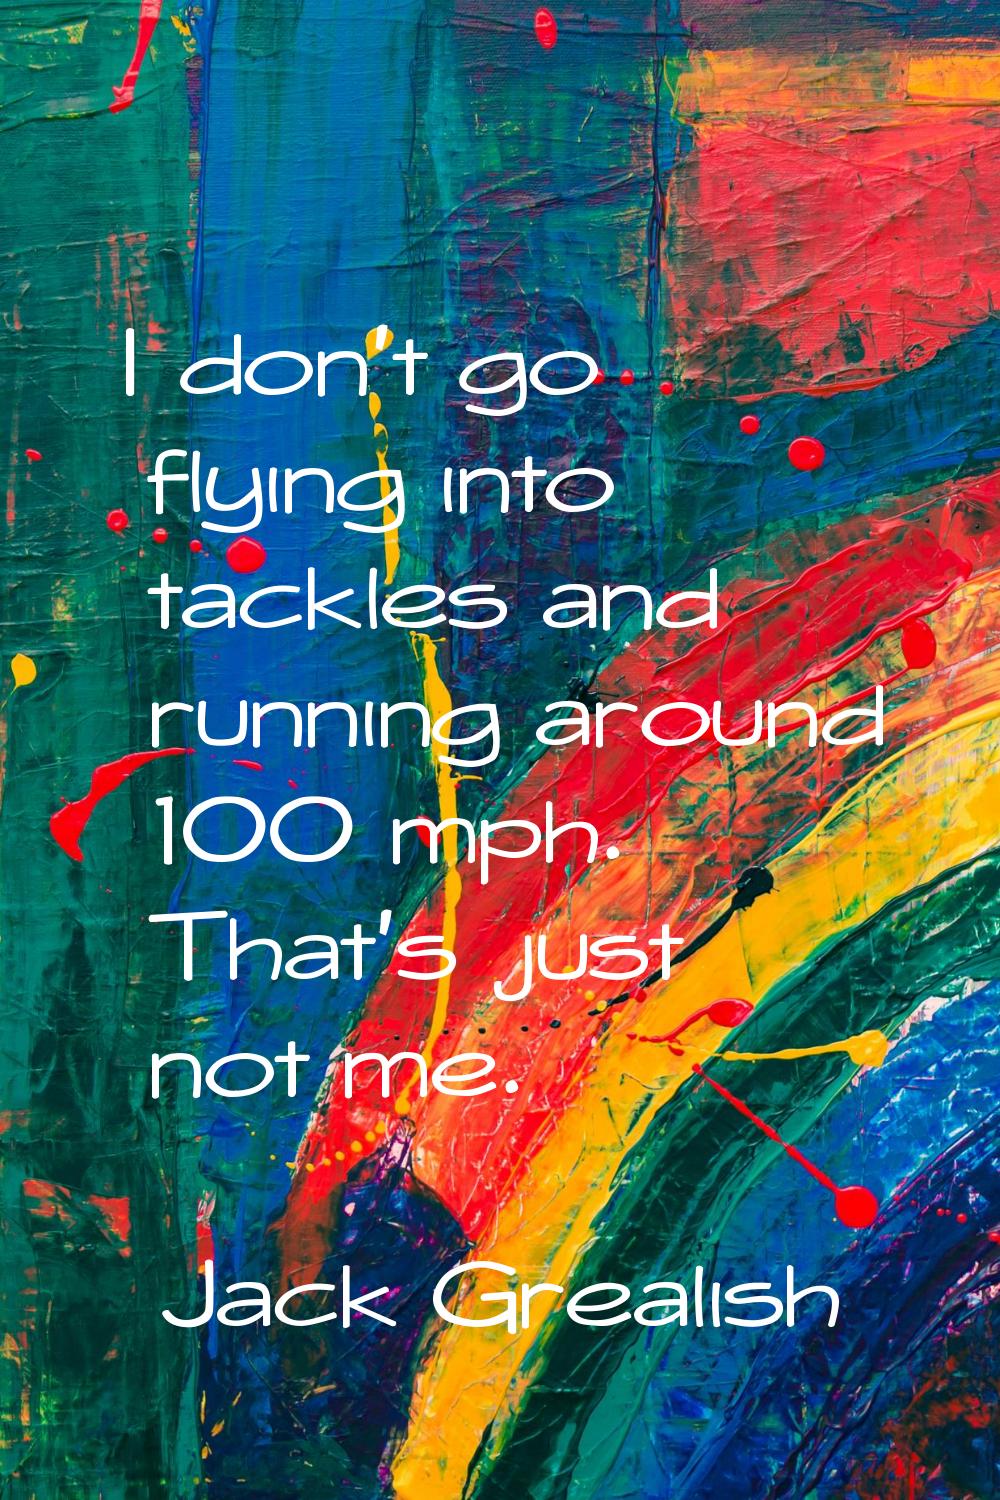 I don't go flying into tackles and running around 100 mph. That's just not me.